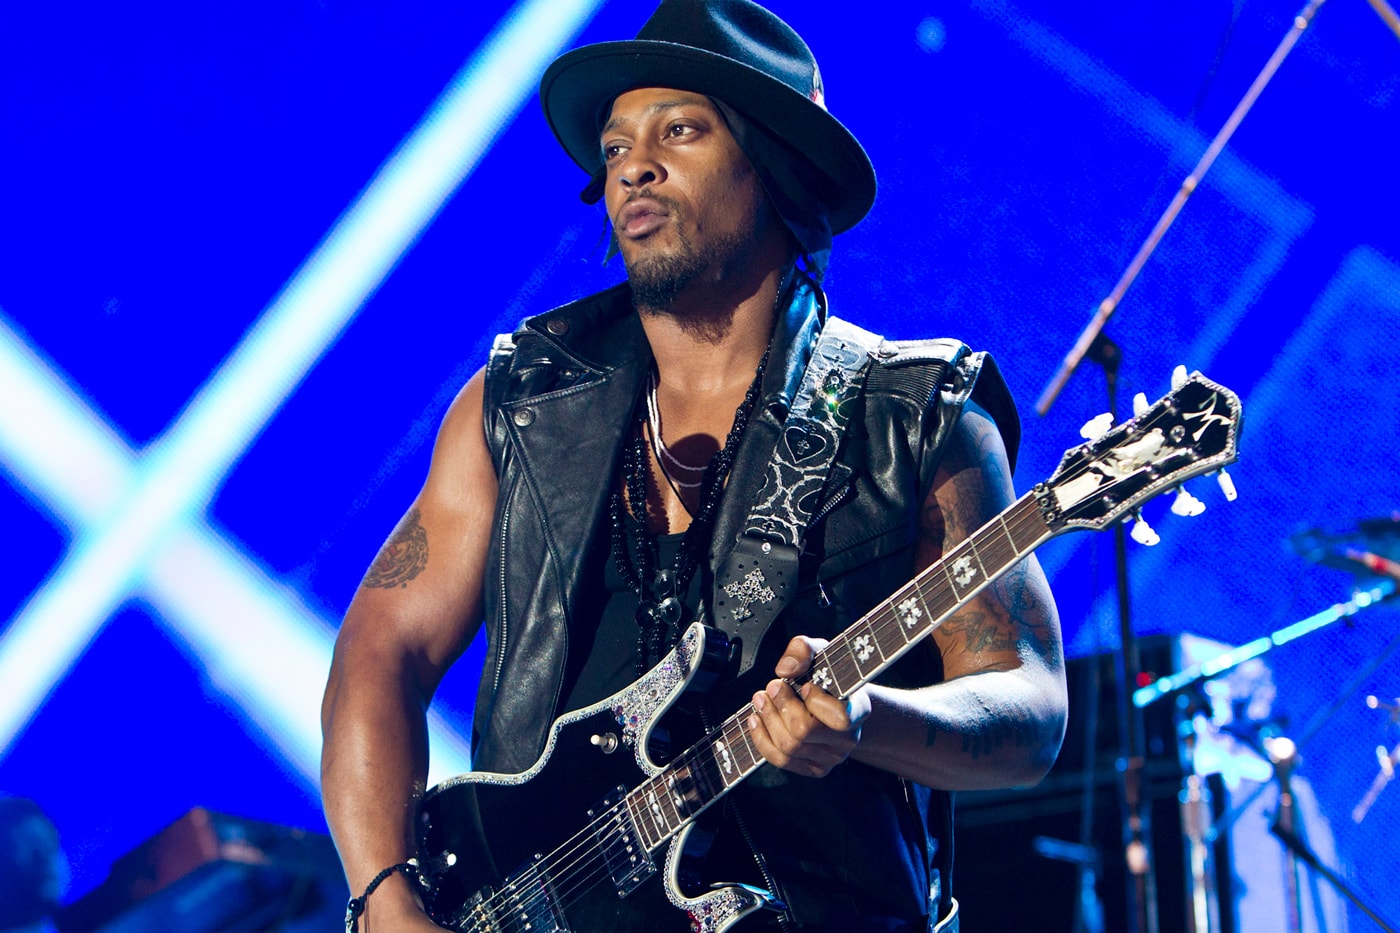 dangelo-janelle-monae-the-roots-prince-tribute-bet-awards